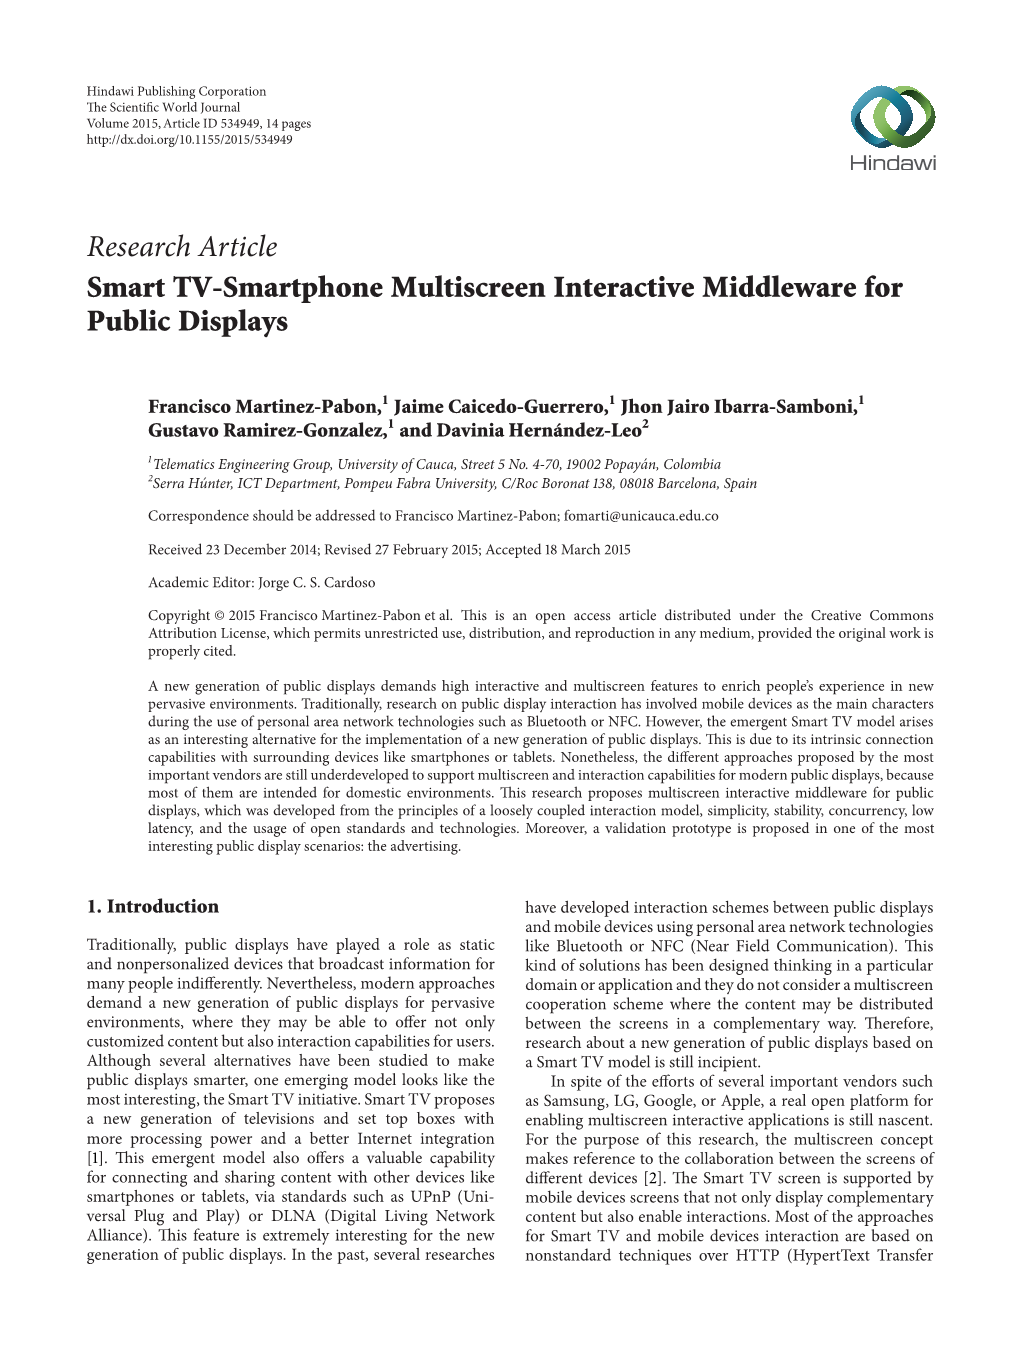 Research Article Smart TV-Smartphone Multiscreen Interactive Middleware for Public Displays